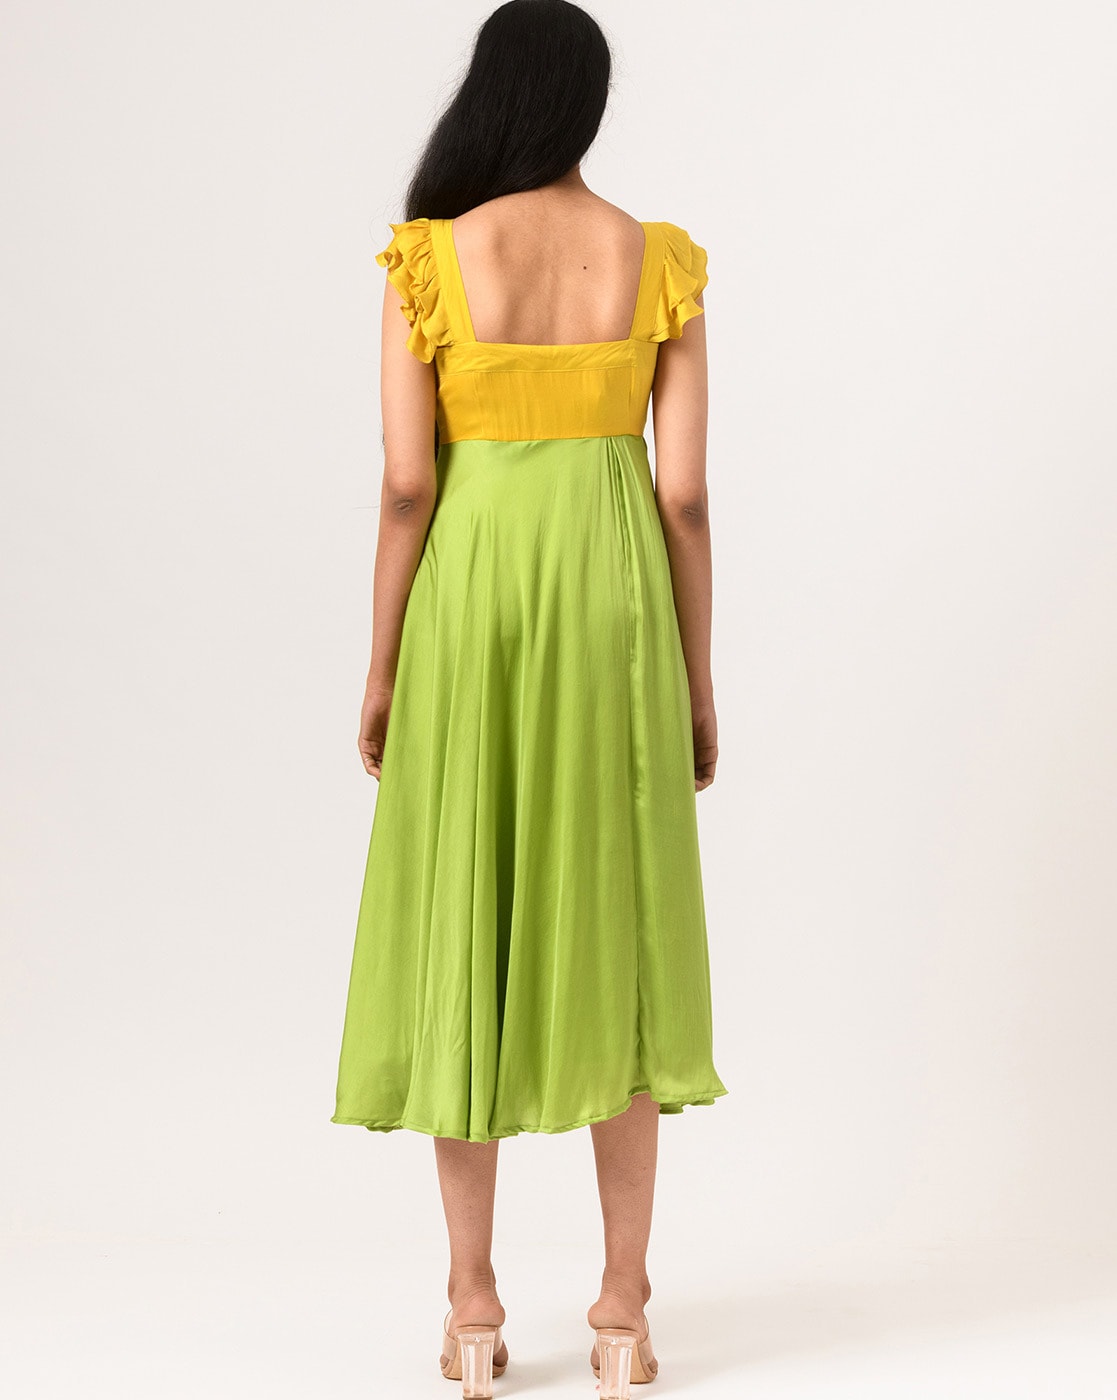 green and yellow dress